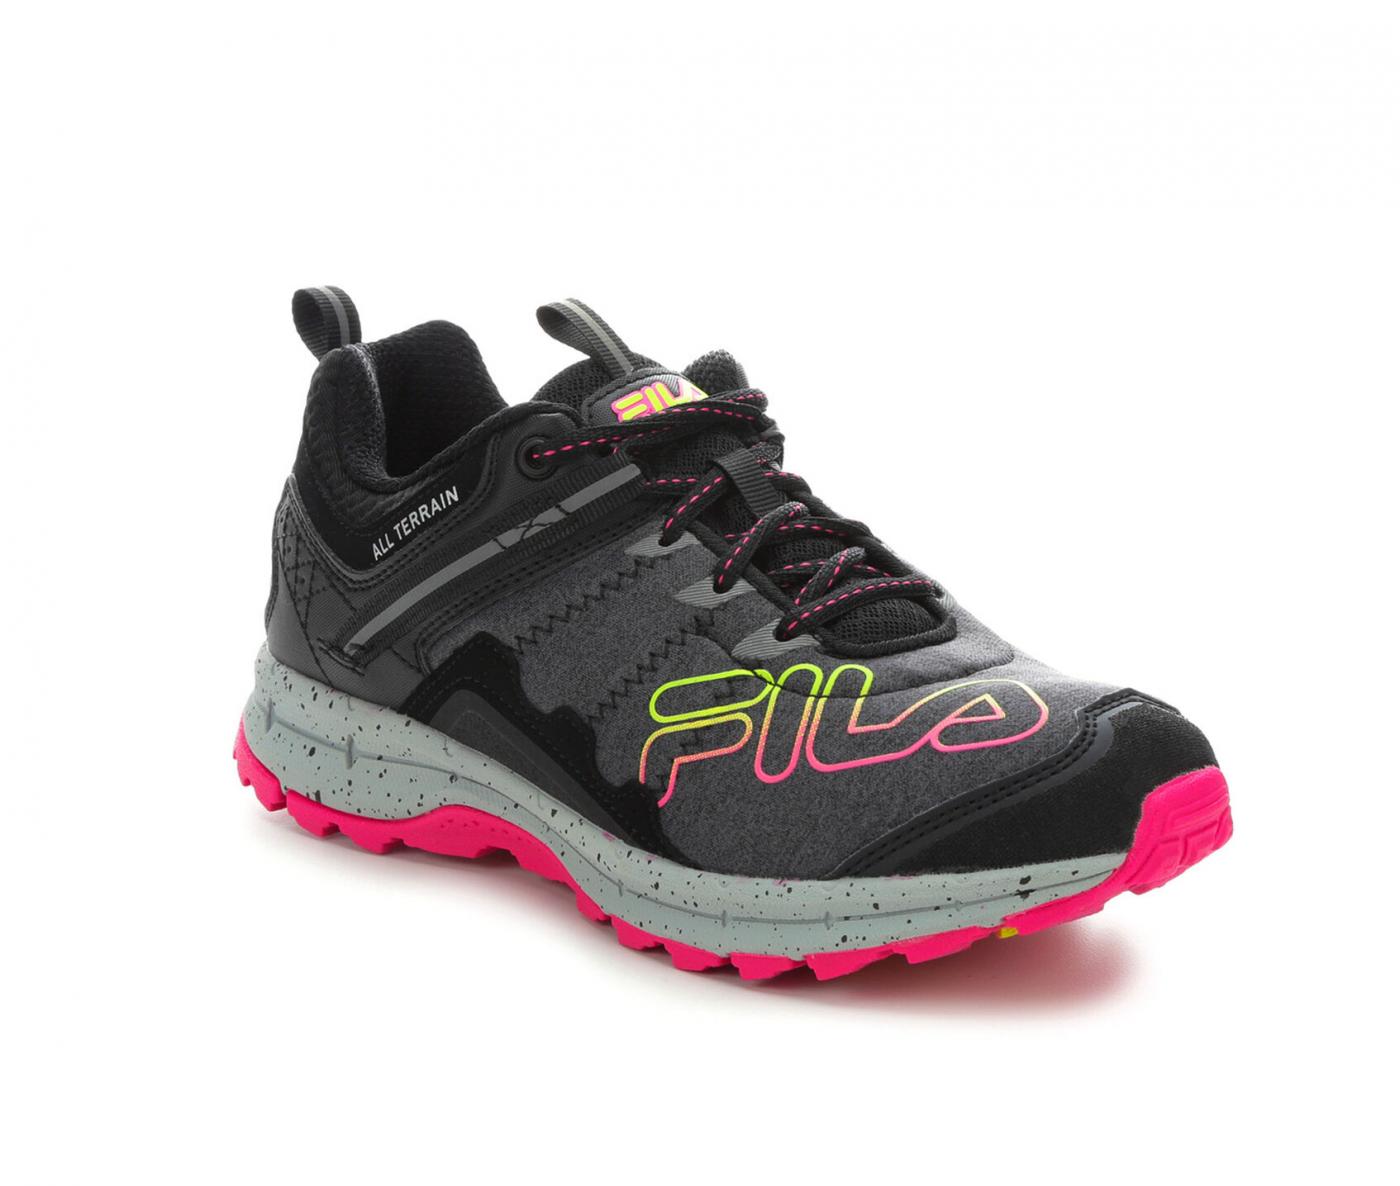 Opaco Desfiladero Viva Fila Blowout 19 Evo Trail Running Shoes Blk/Pink/Yel | Fila Womens  Athletics And Sneakers •